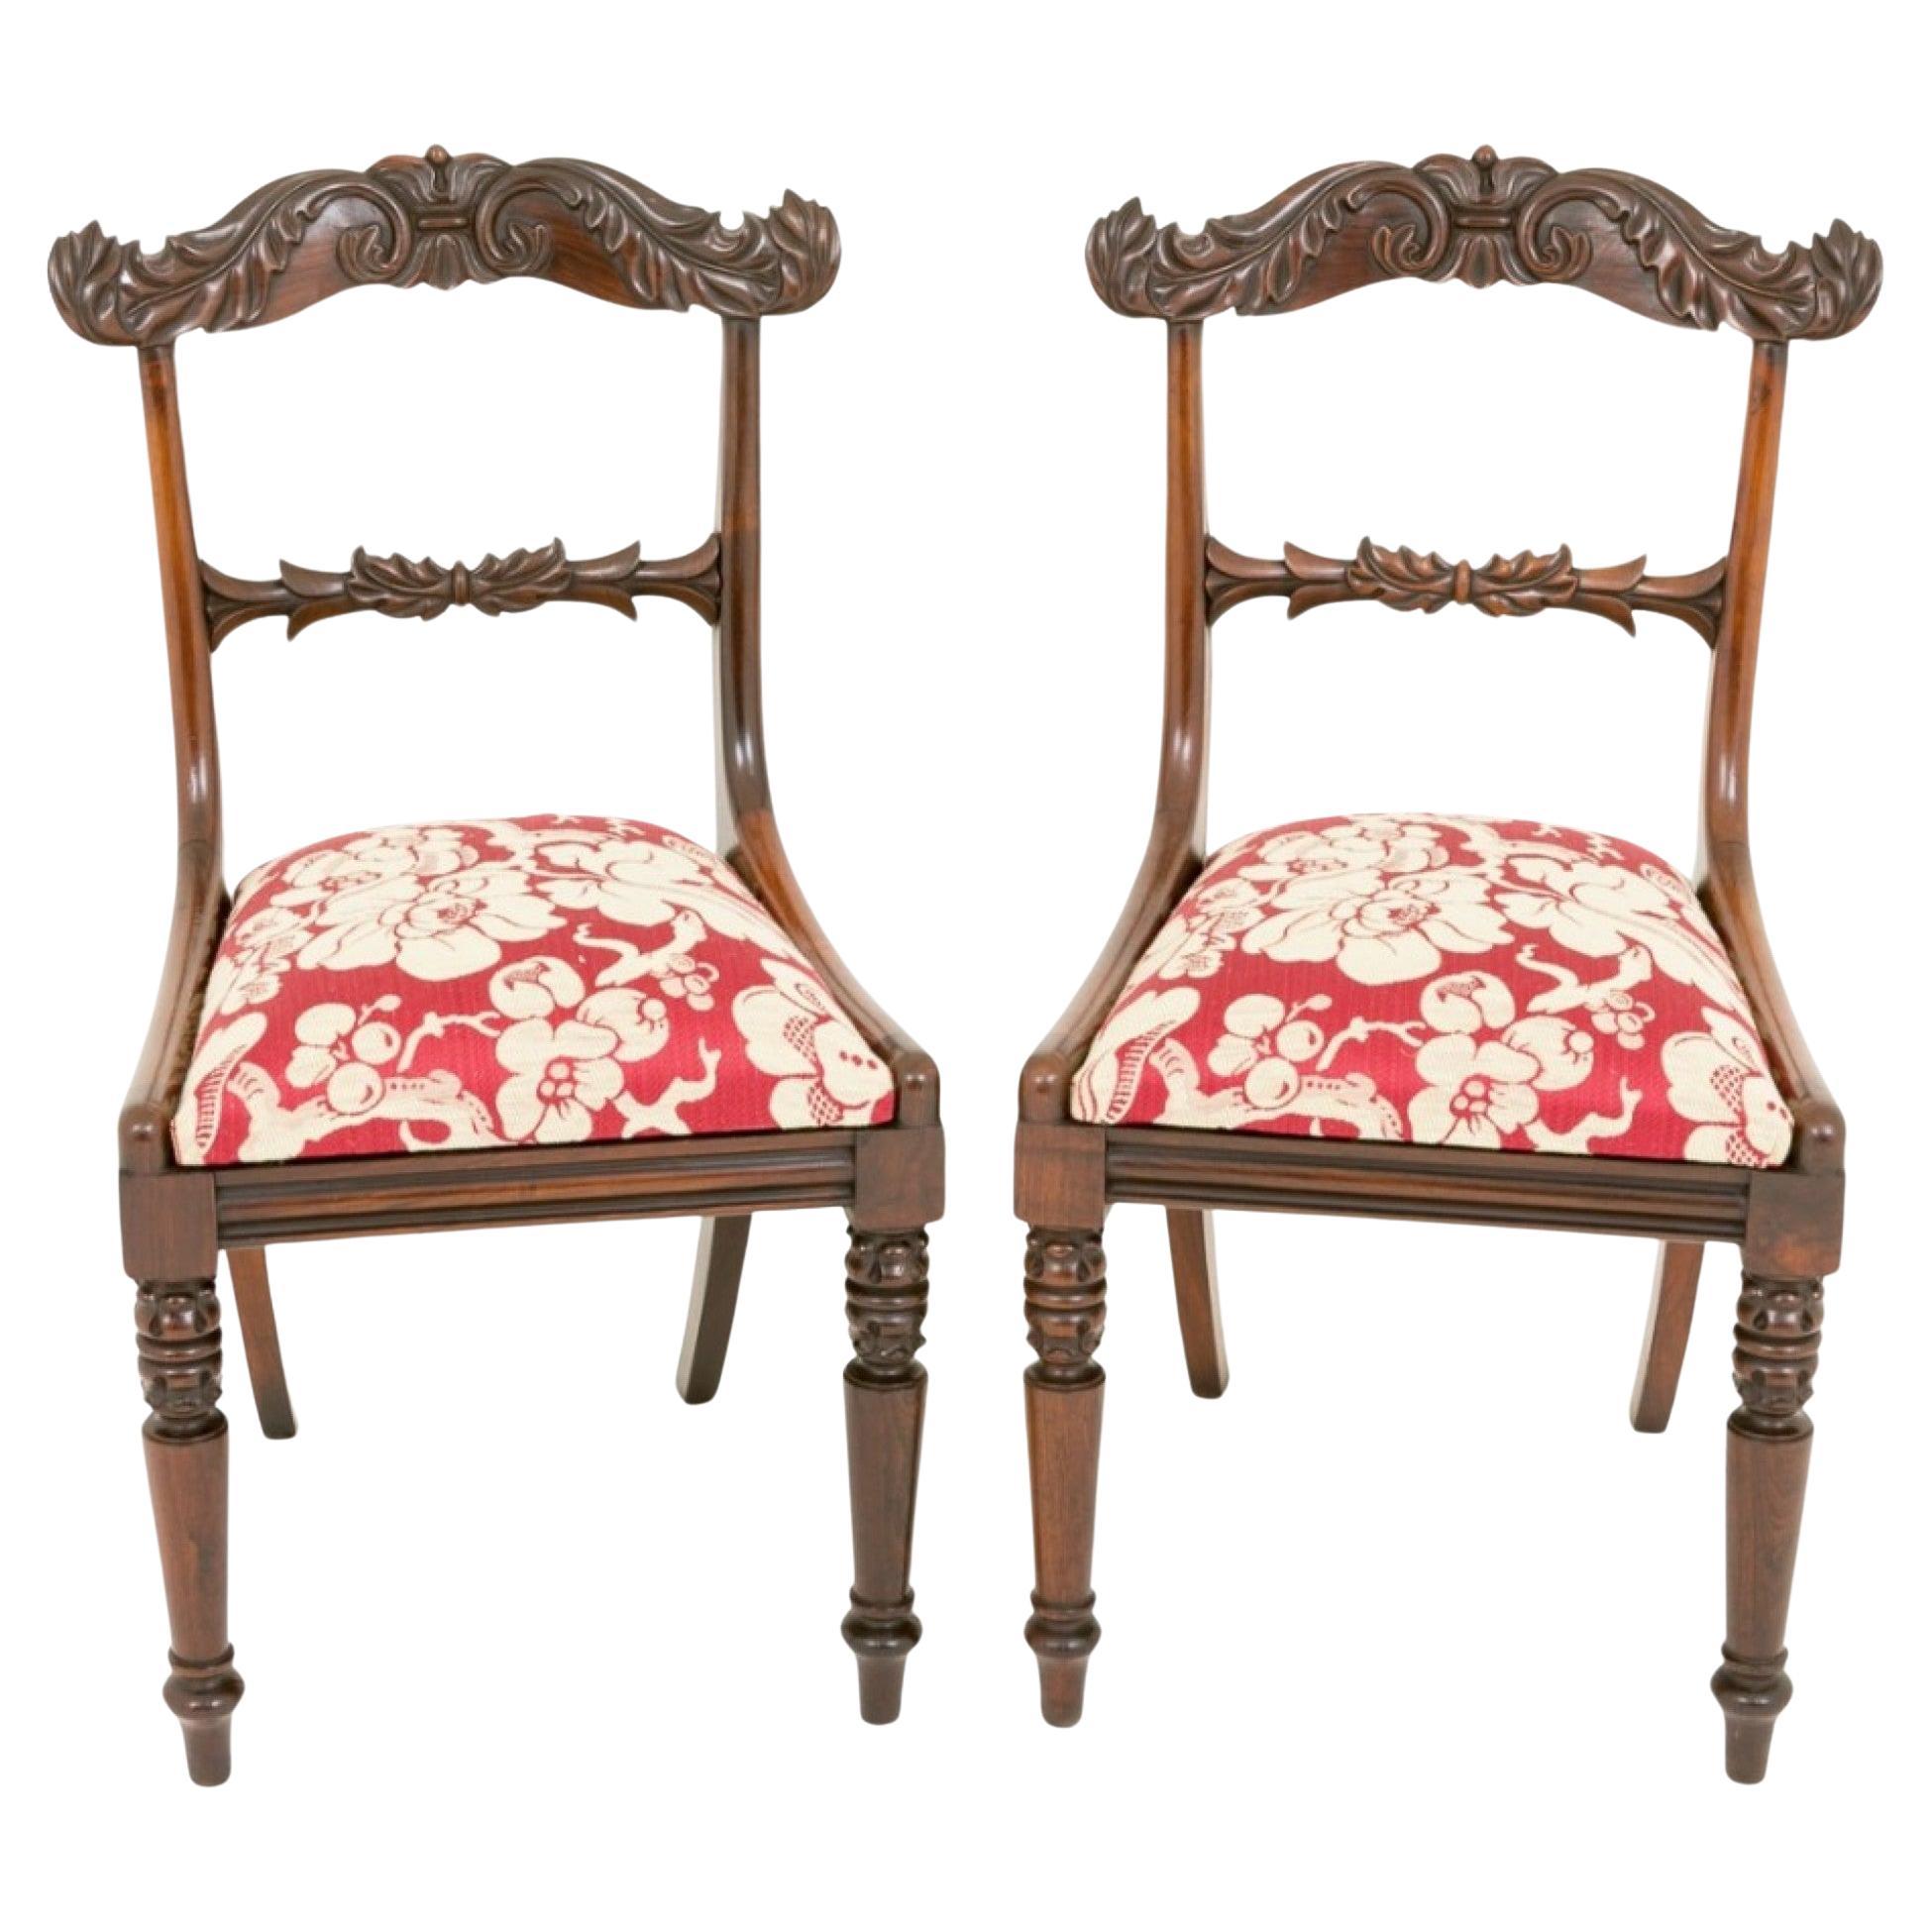 Pair Antique Regency Arm Chairs in Rosewood Dining Chair